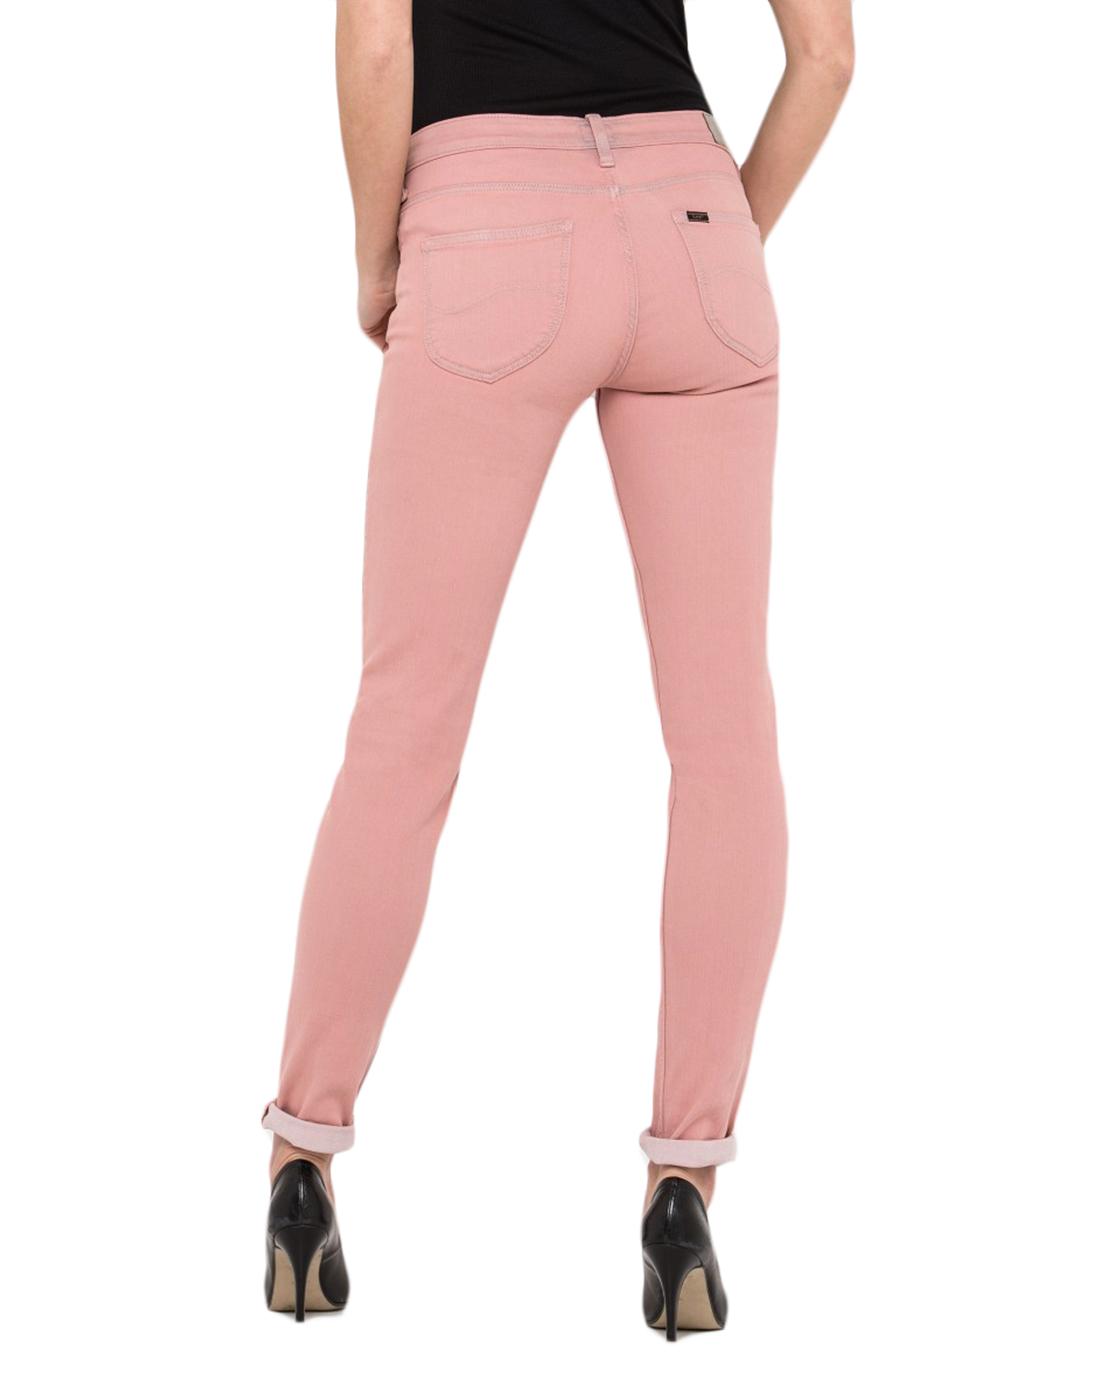 pink jeans womens